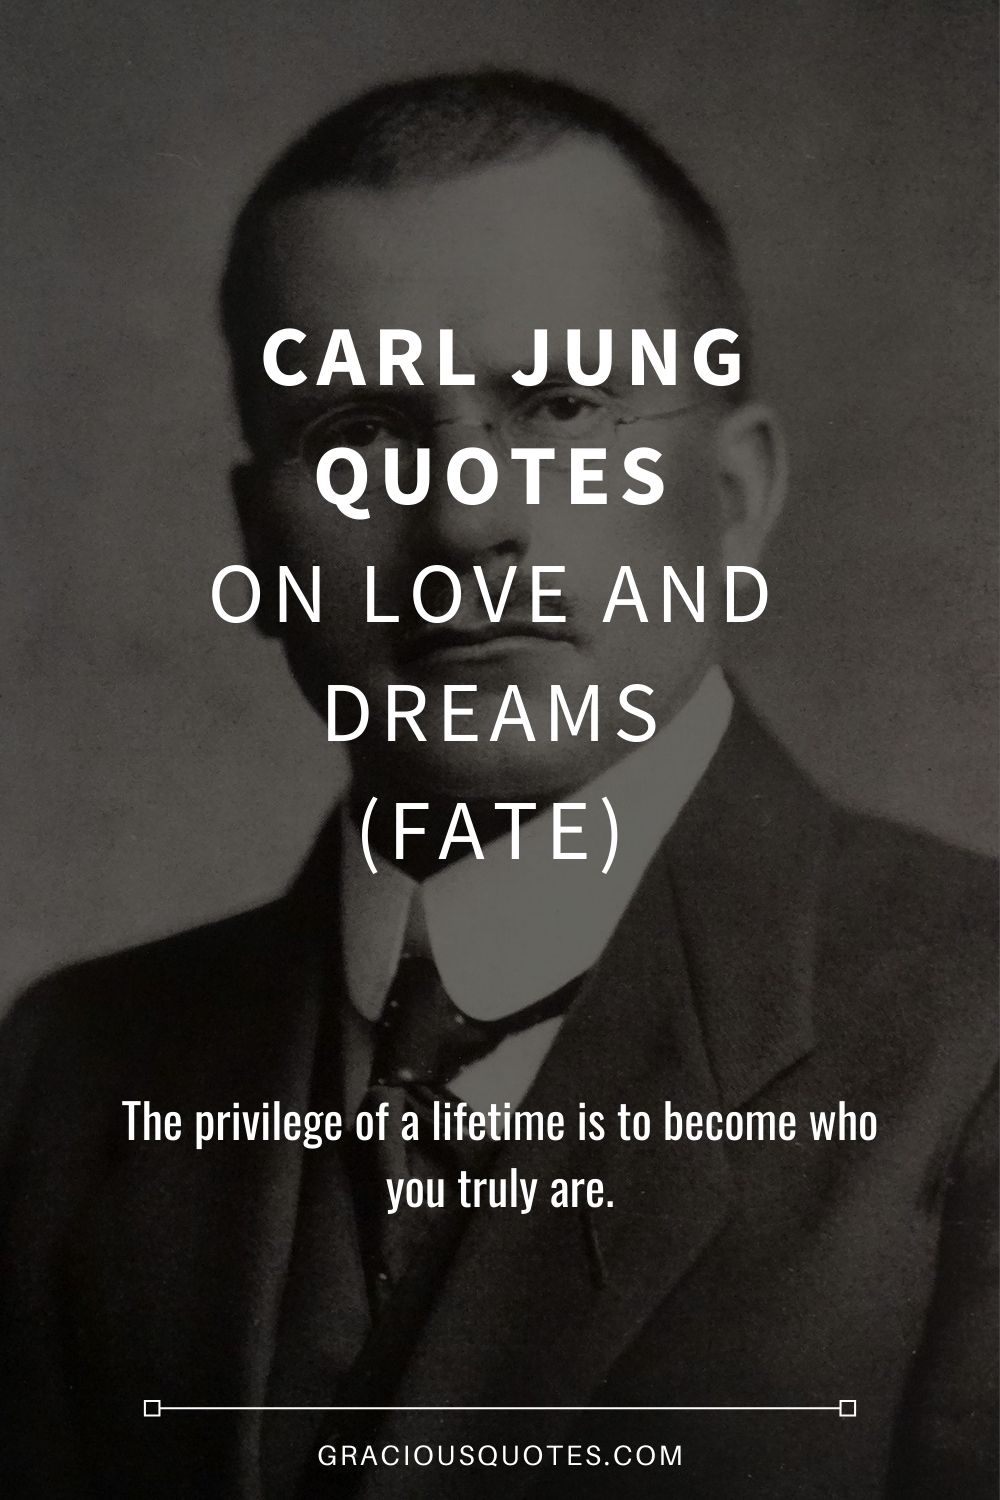 Carl Jung Quotes on Love and Dreams (FATE) - Gracious Quotes